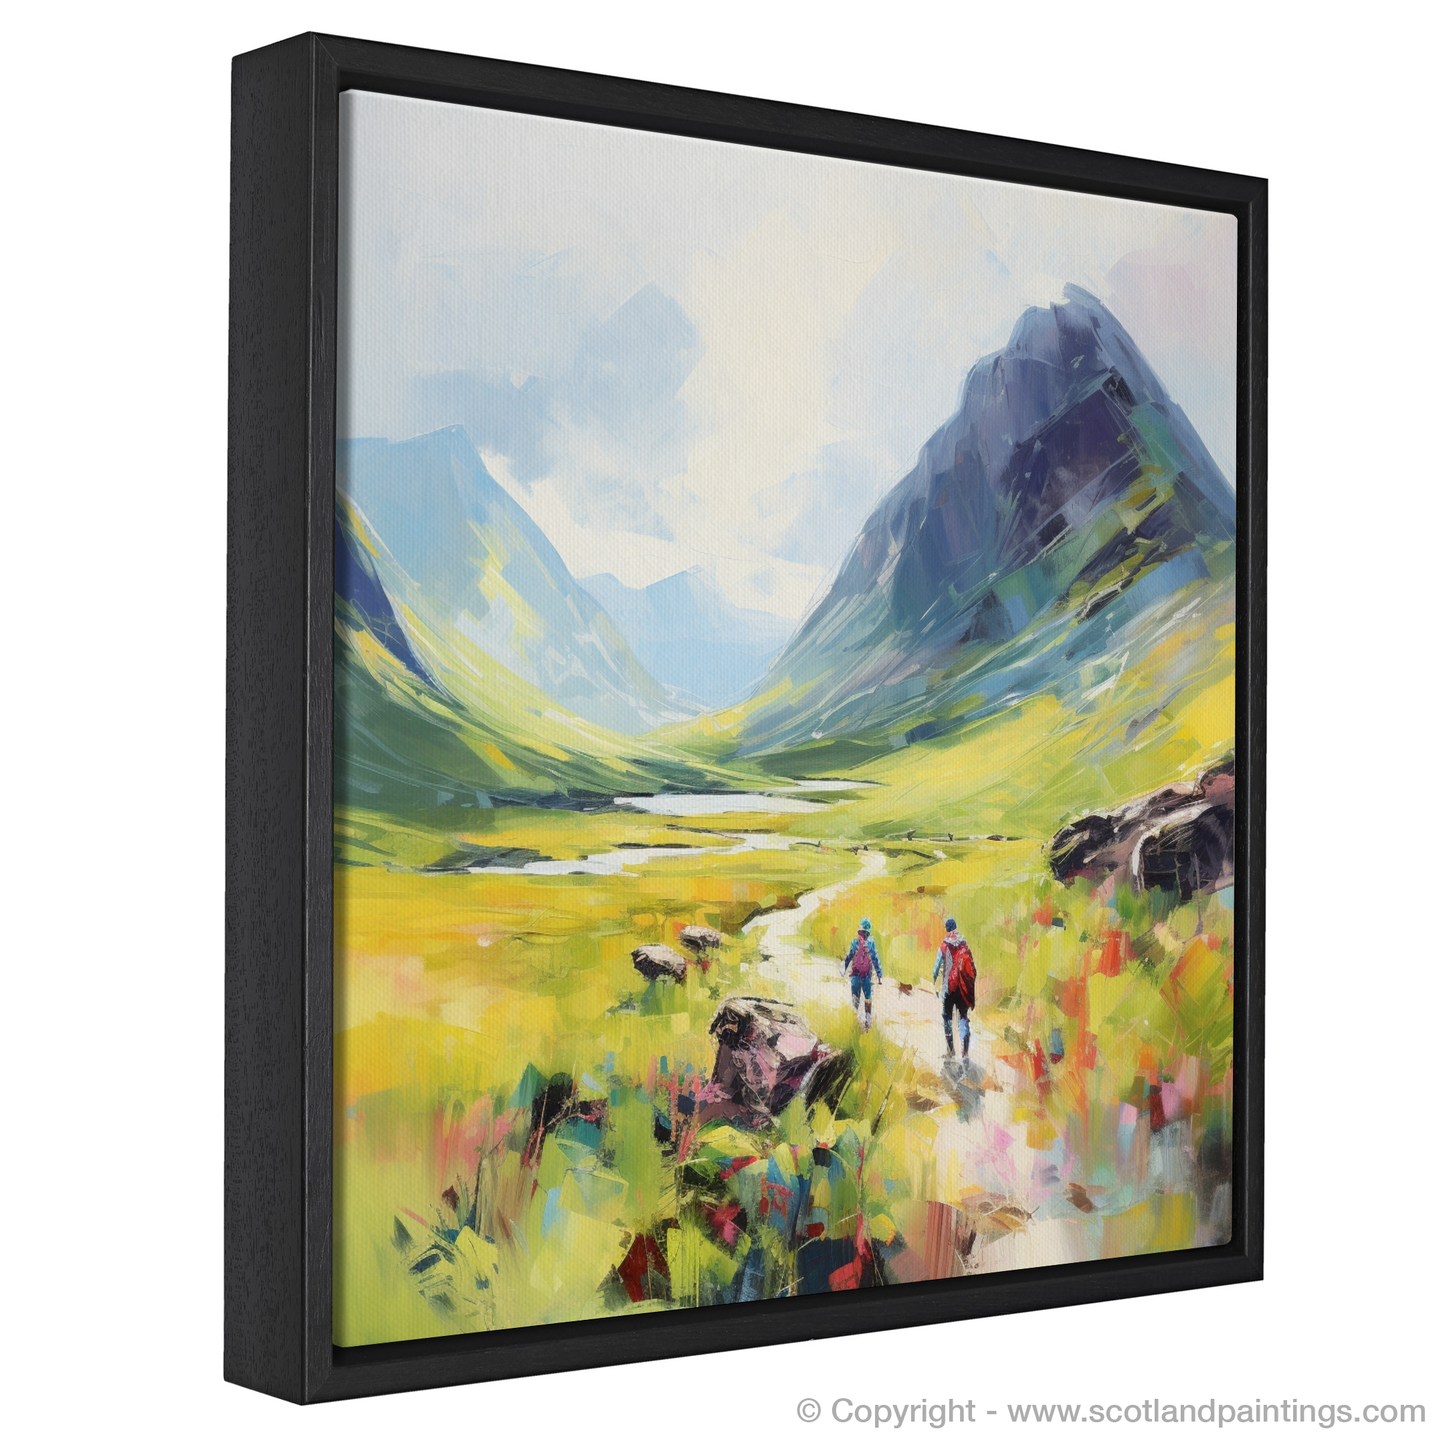 Painting and Art Print of Walkers in Glencoe during summer entitled "Summer Wanderers in Glencoe".